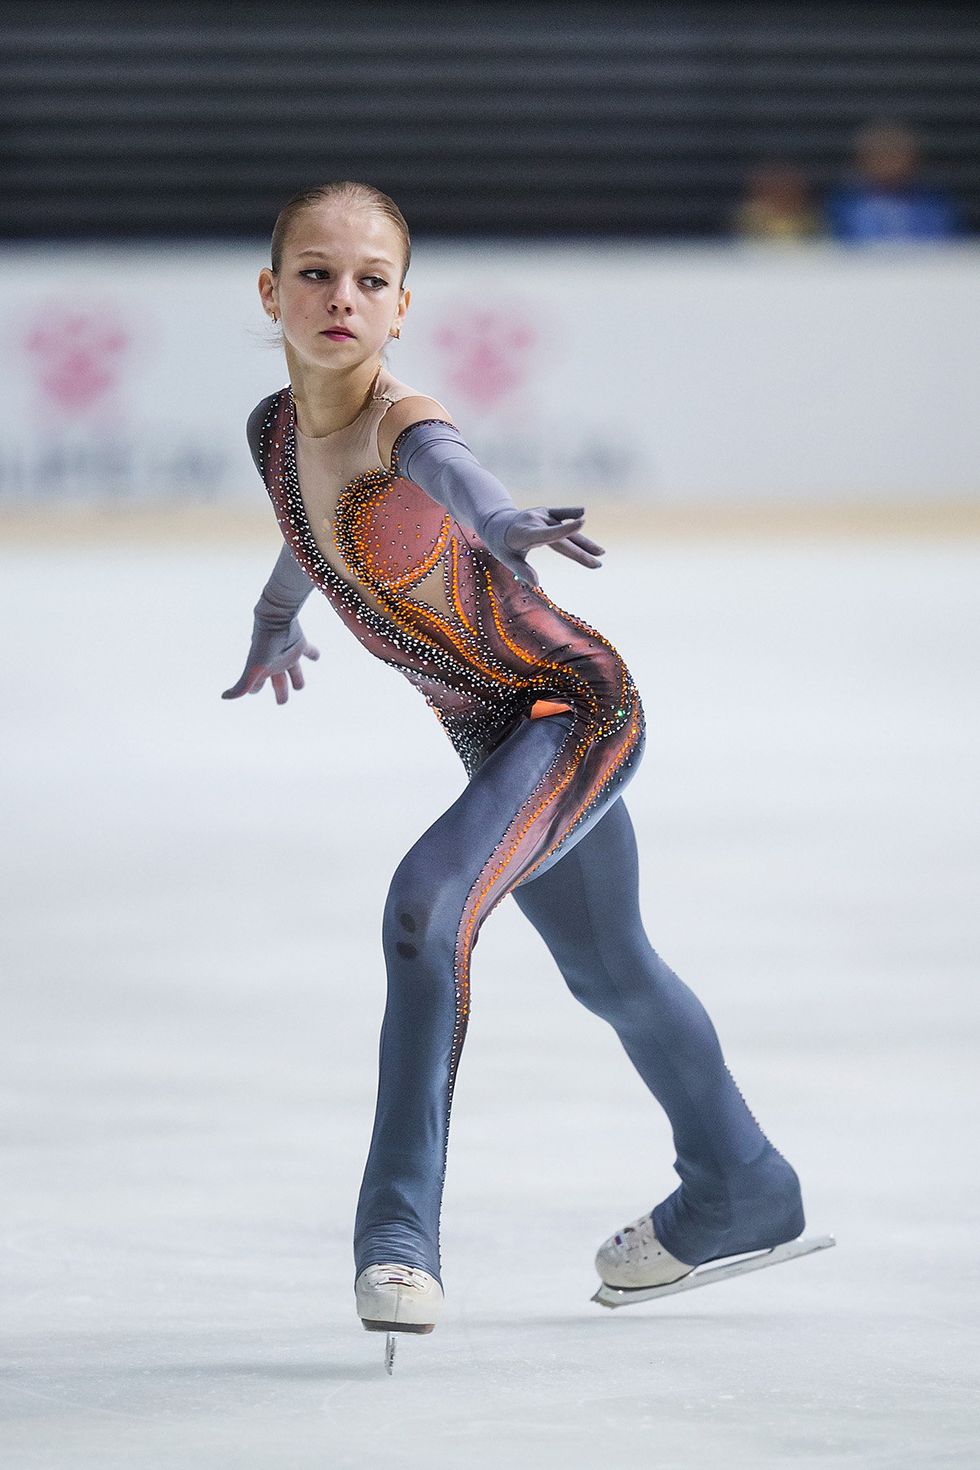 Figure skate, Ice skating, Skating, Figure skating, Recreation, Ice skate, Jumping, Ice dancing, Sports, Ice rink, 